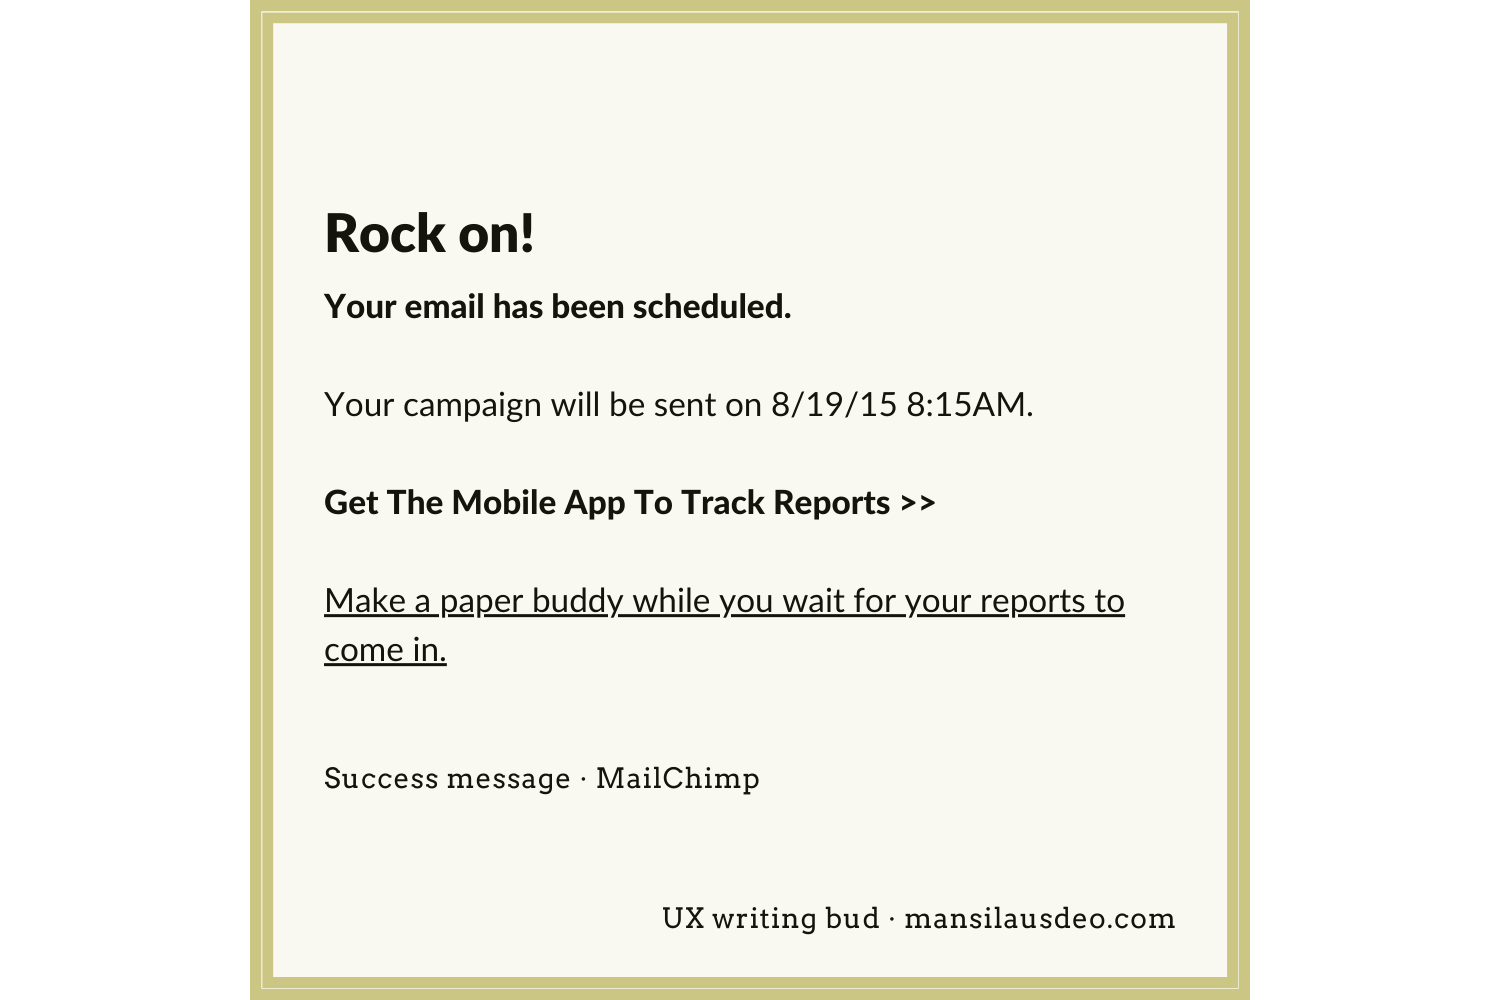 Rock on! Your email has been scheduled. Your campaign will be sent on 8/19/15 8:15AM. Get The Mobile App To Track Reports >> Make a paper buddy while you wait for your reports to come in. Success message - MailChimp UX Writing bud